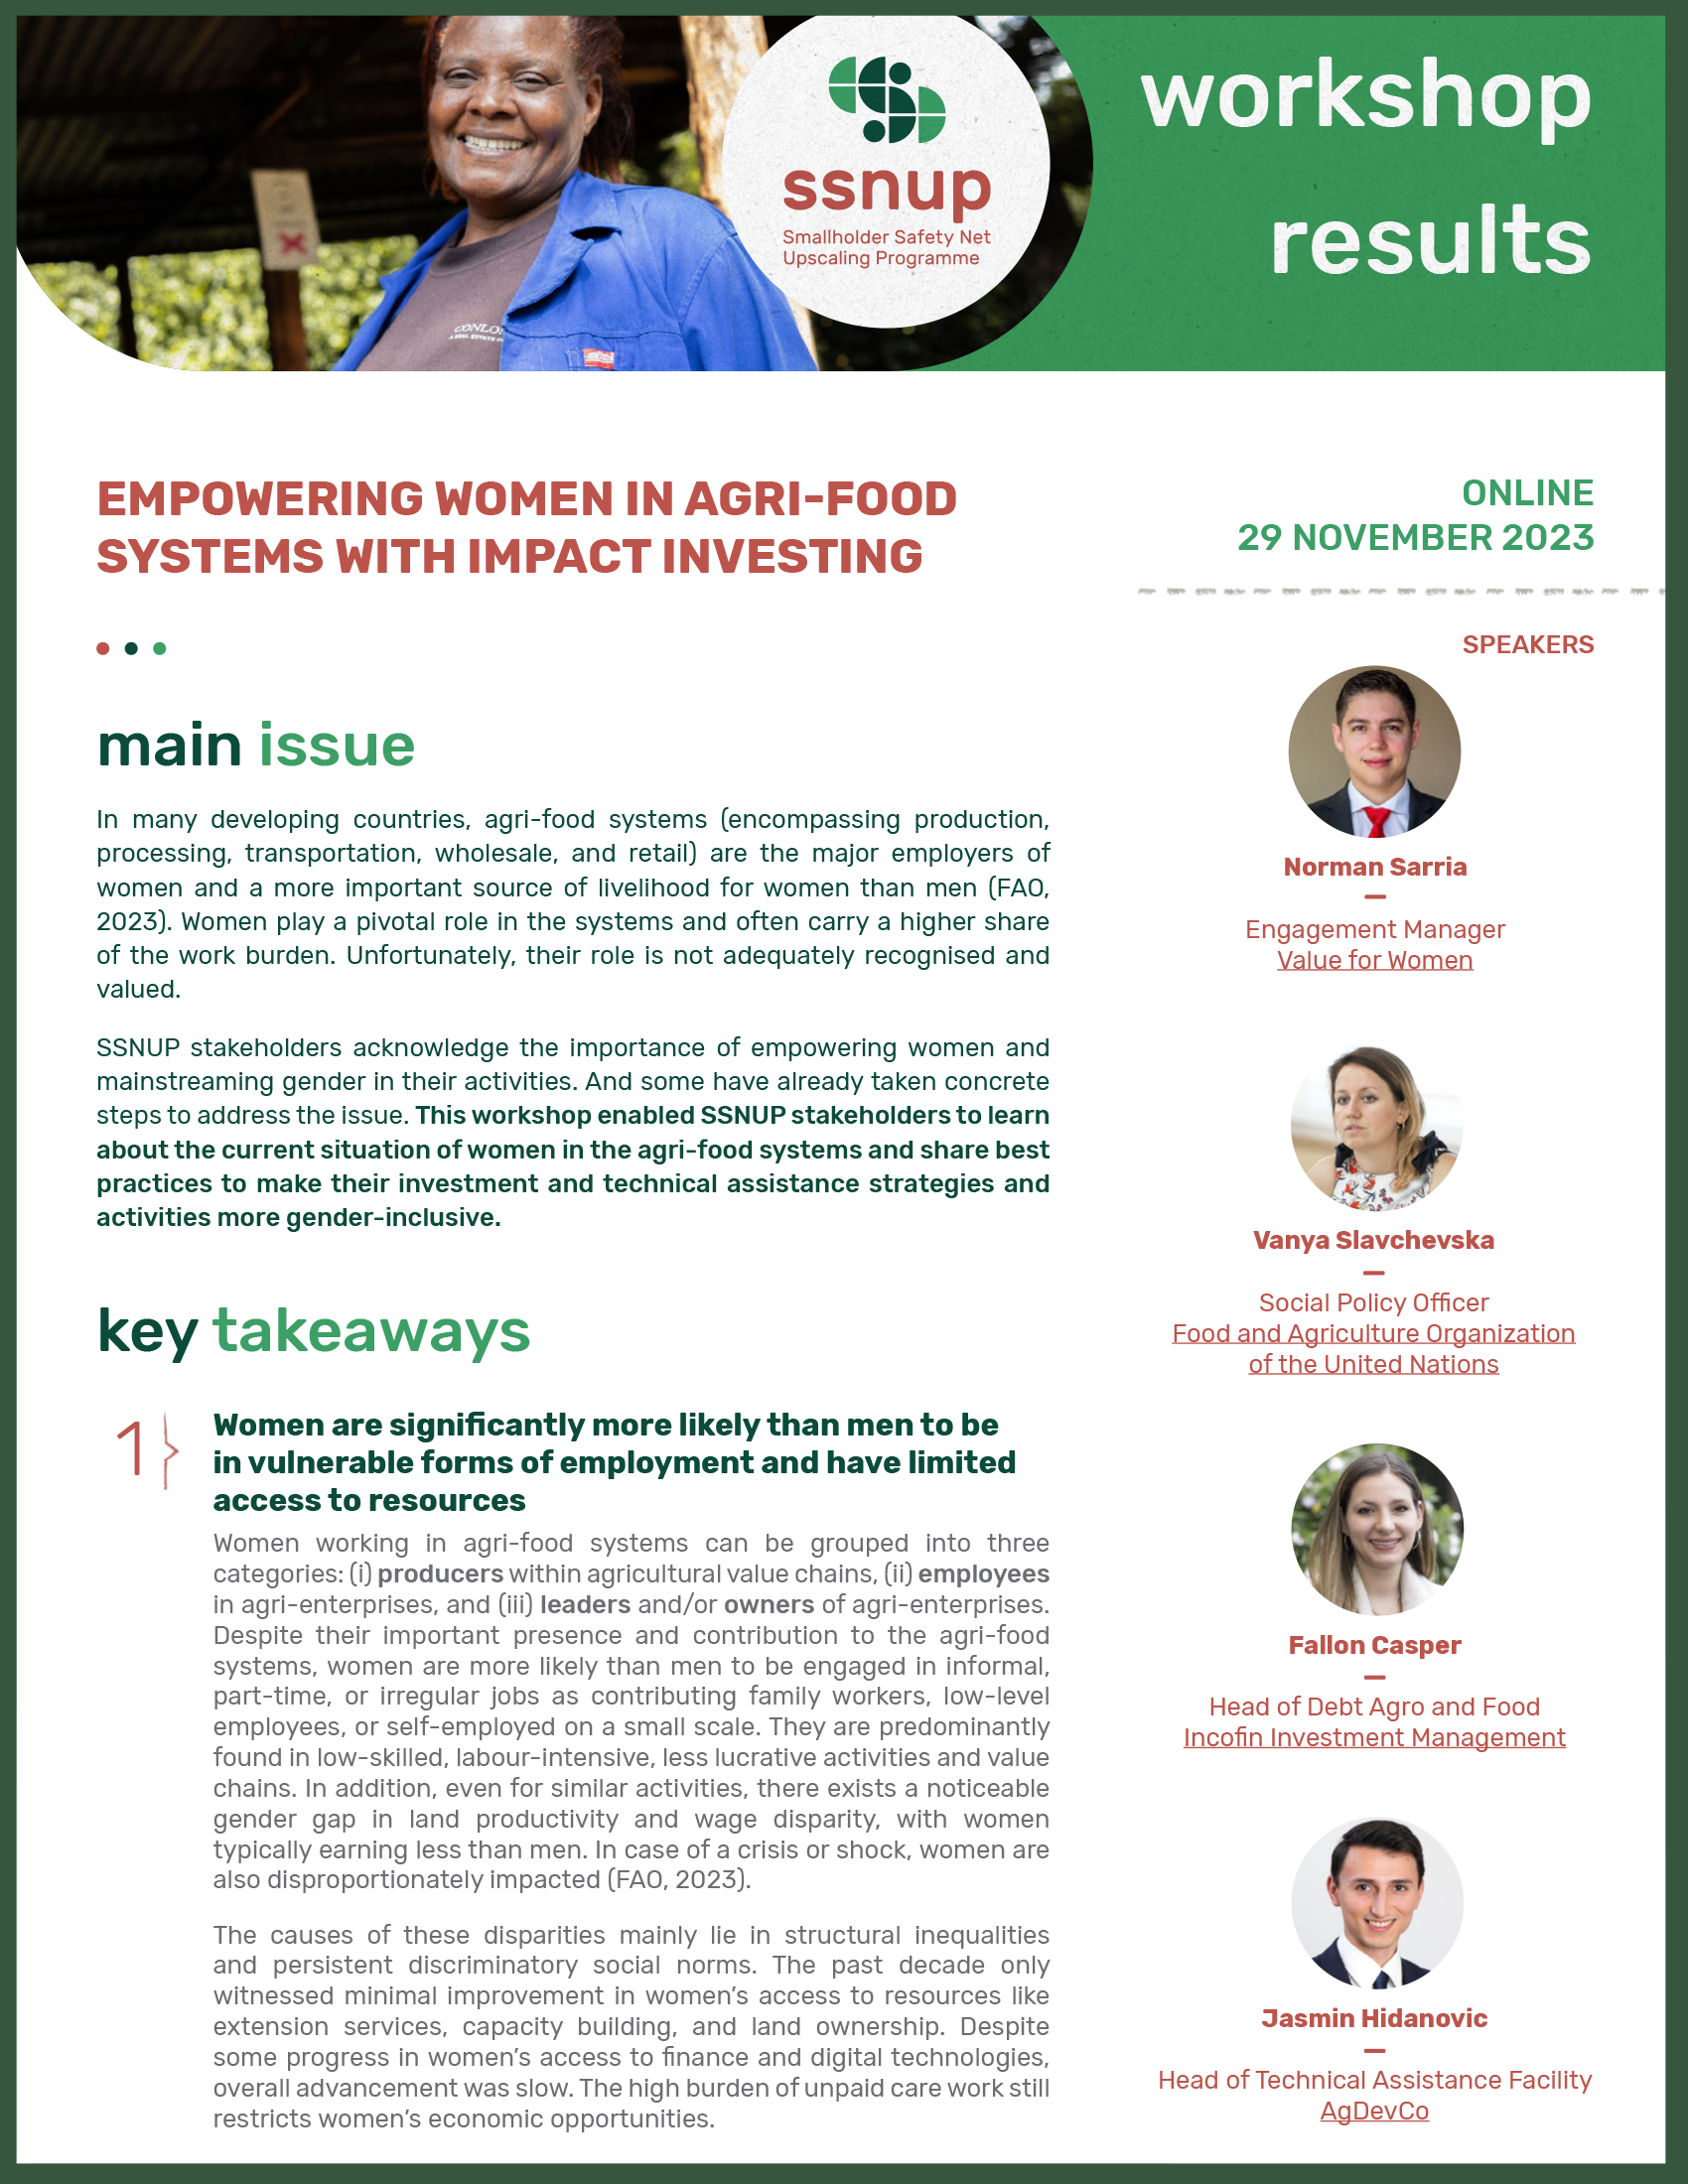 Empowering women in agri-food systems with impact investing